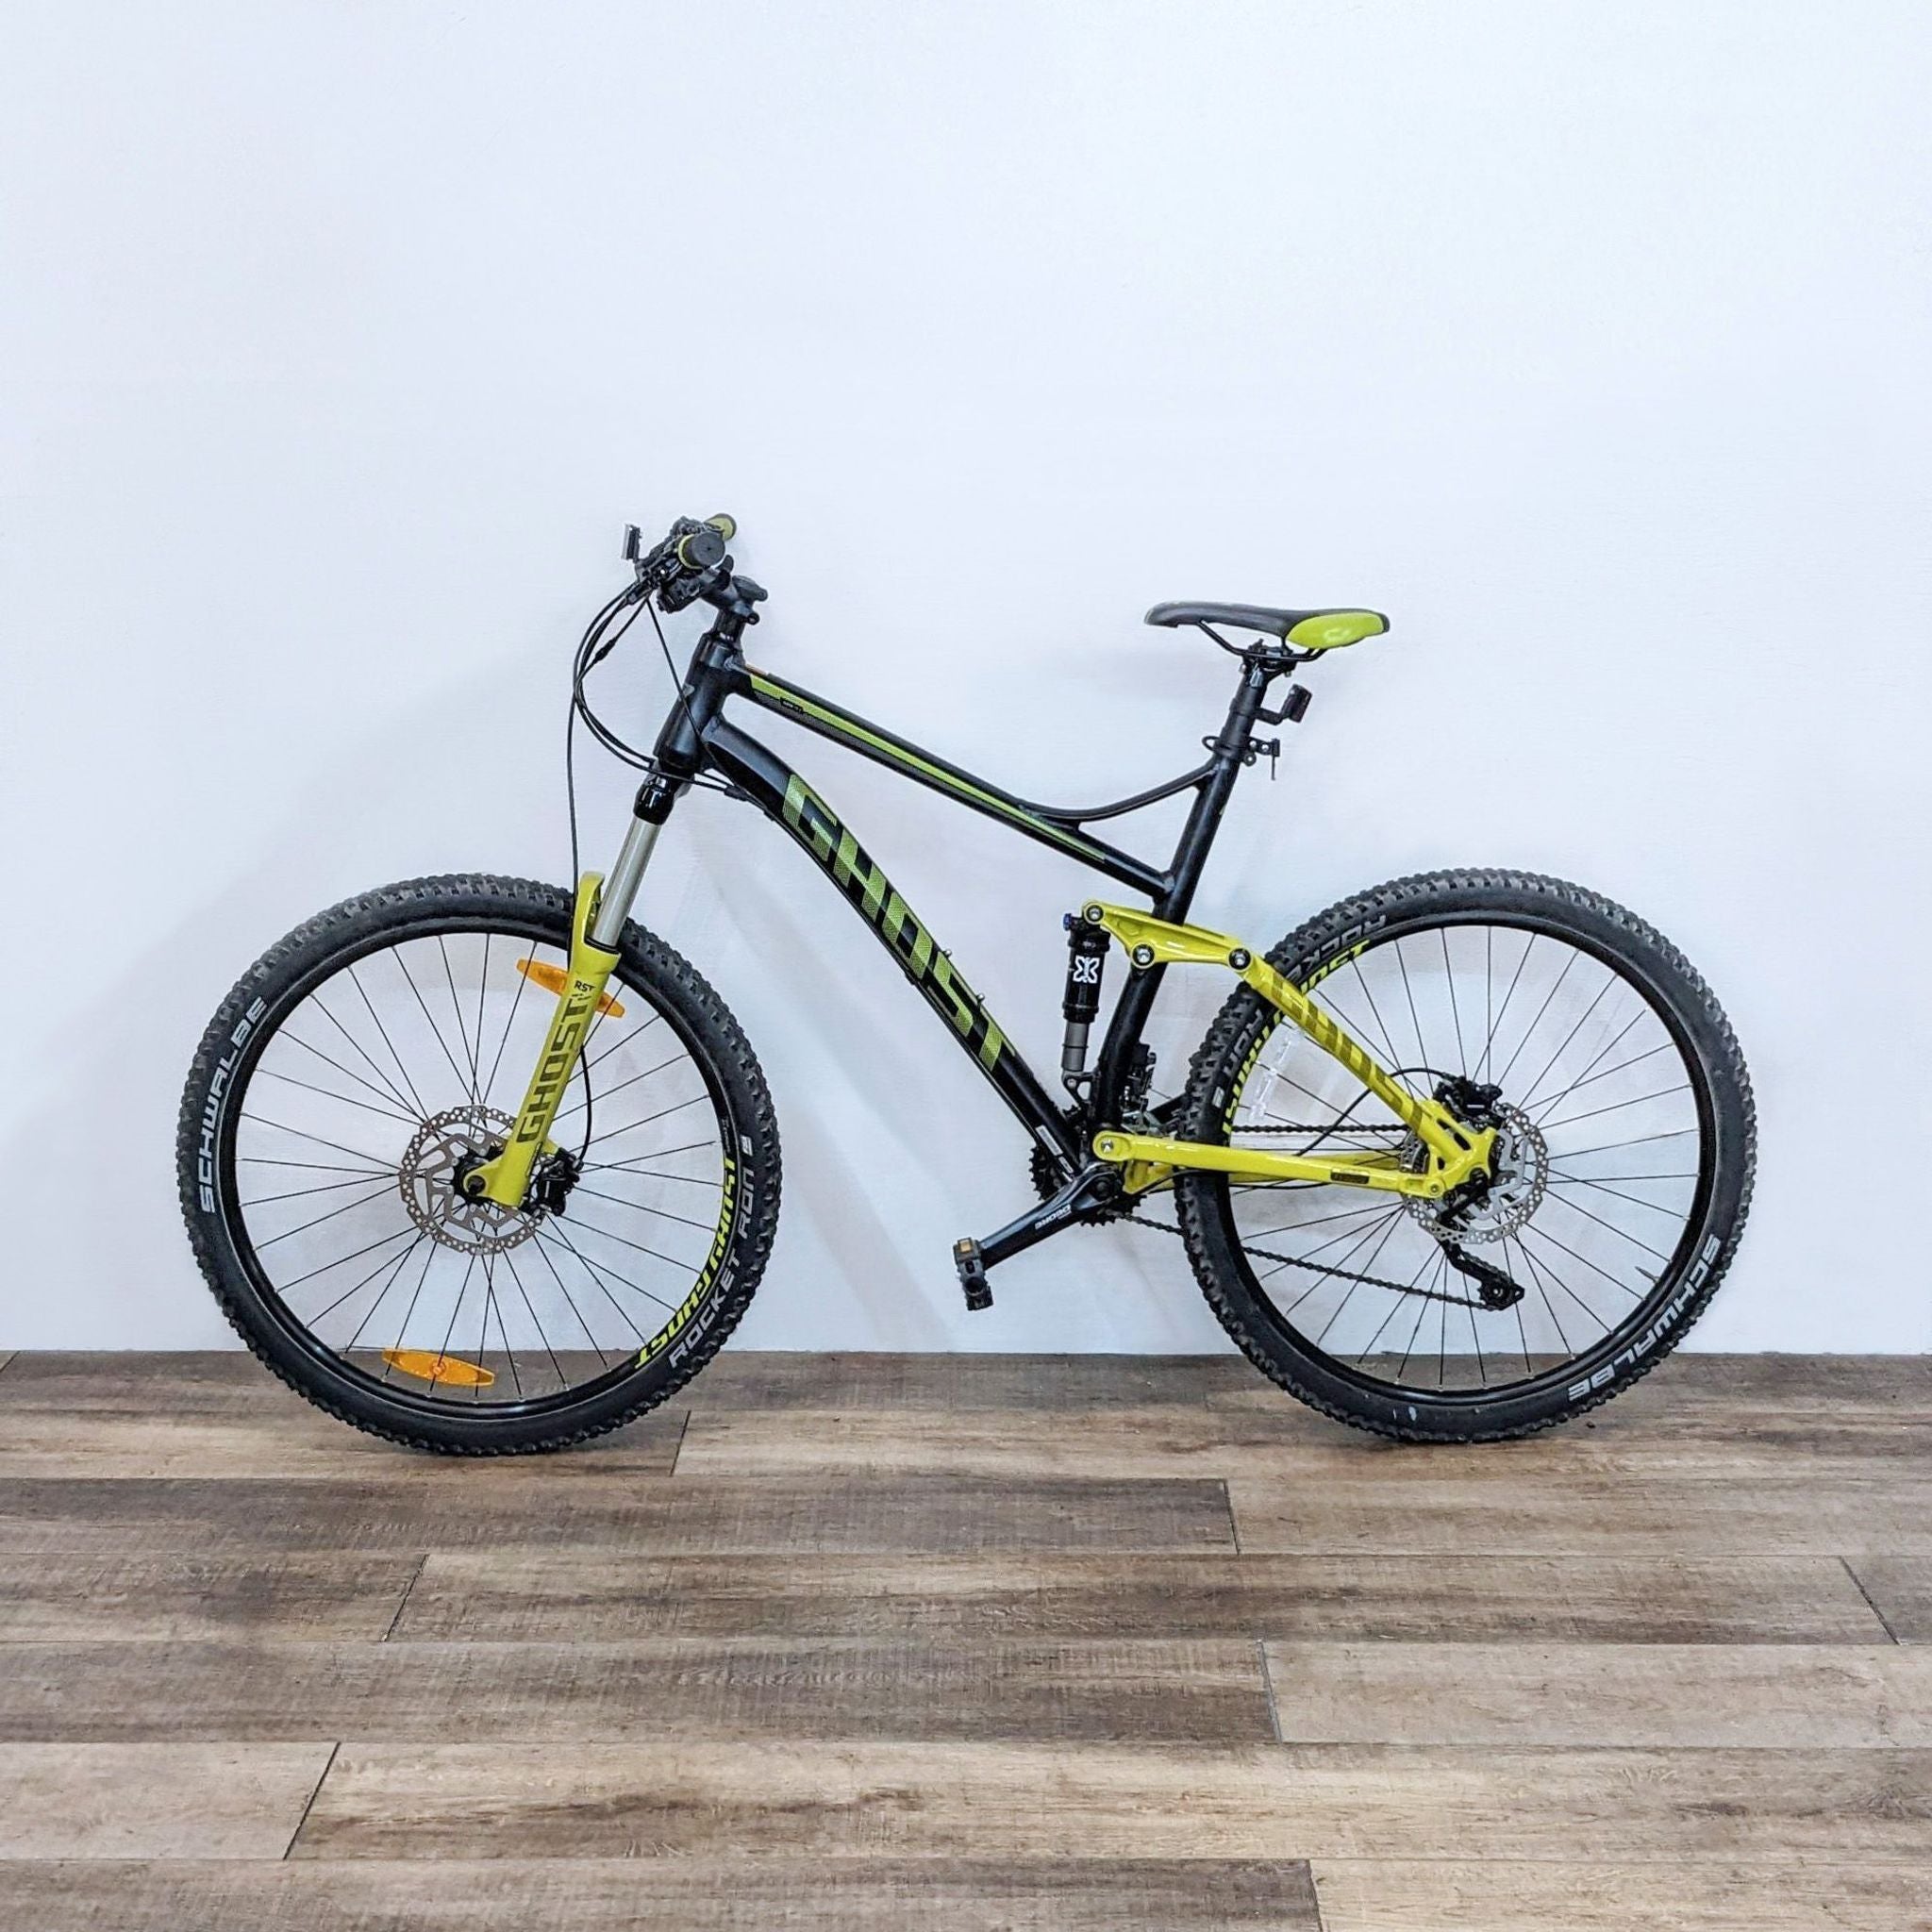 REI full-suspension mountain bike in black and yellow, designed for rugged terrain with visible safety labels.